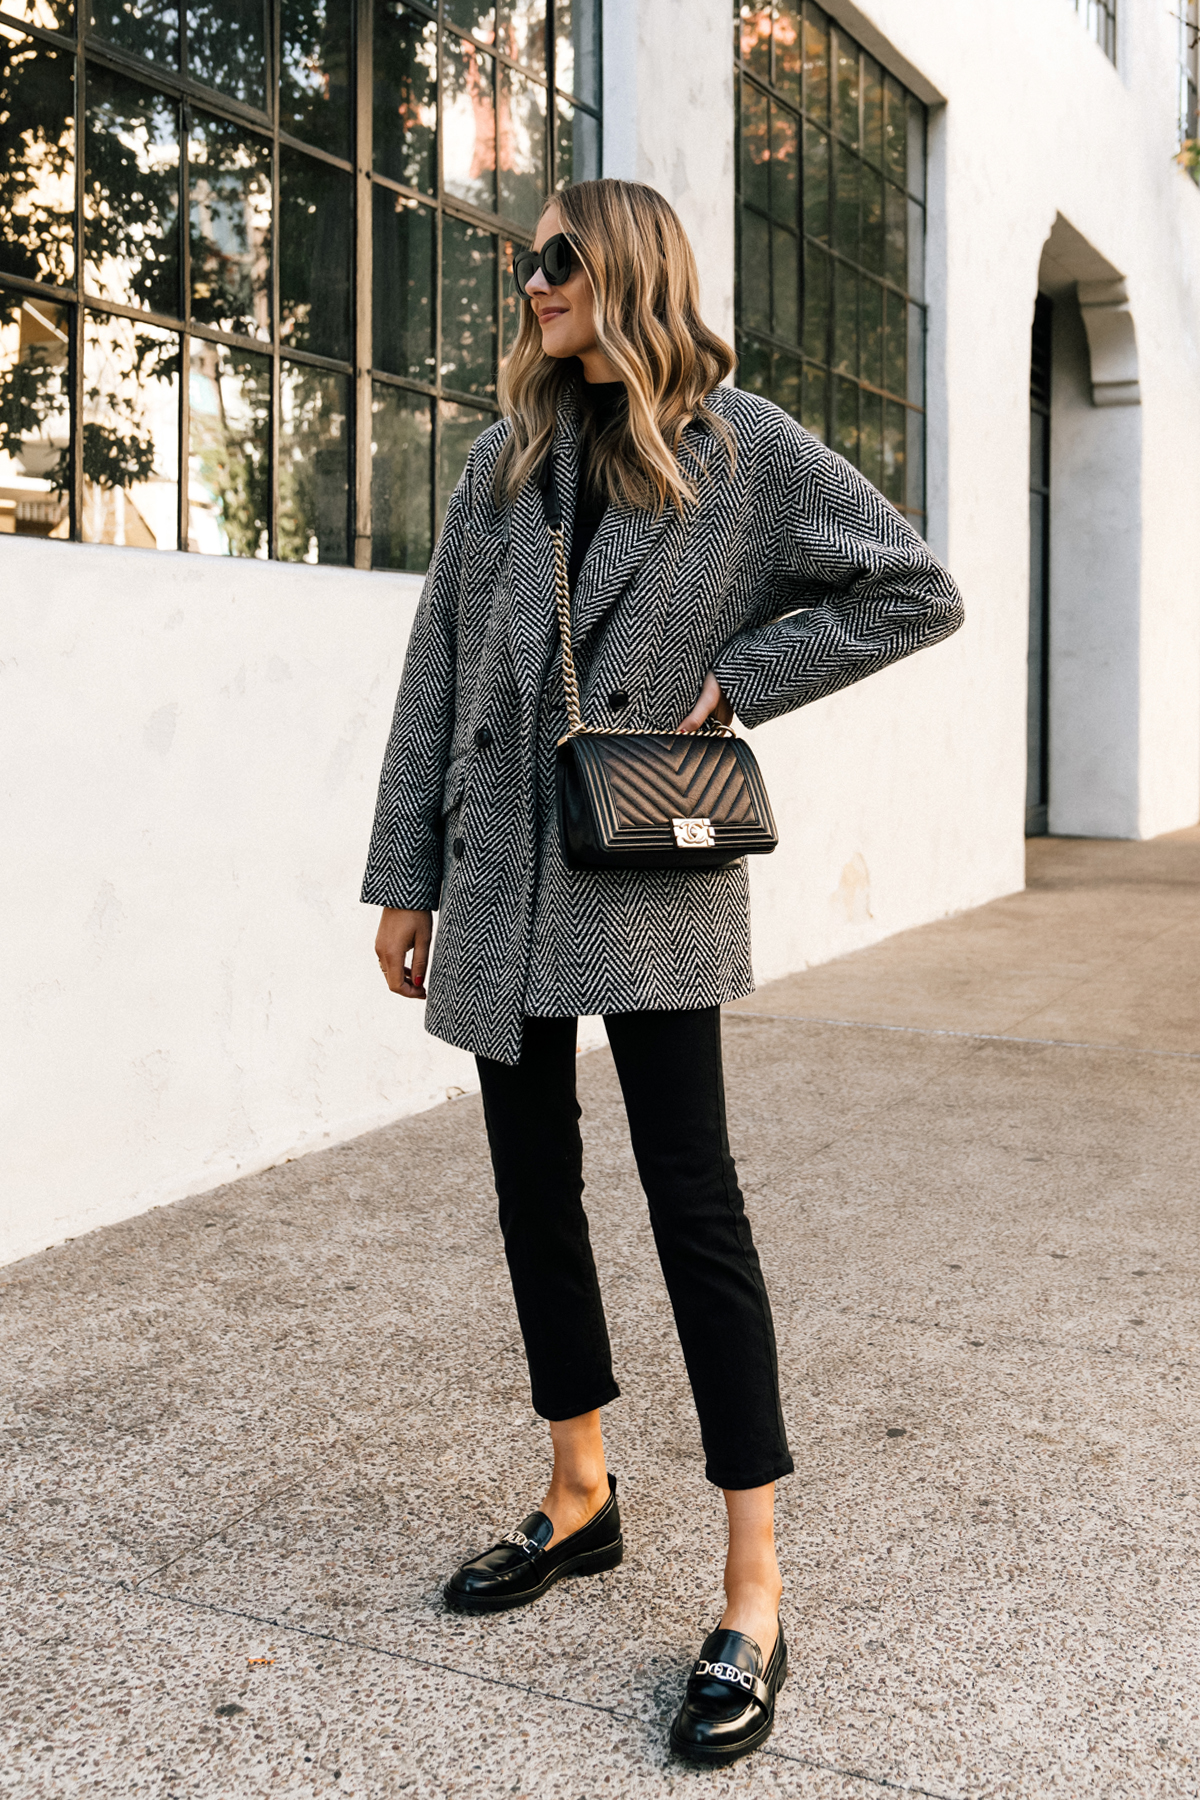 Fashion Jackson Wearing Black Herringbone Coat Black Jeeans Black Loafers Outfit Street Style womens loafers with short heel